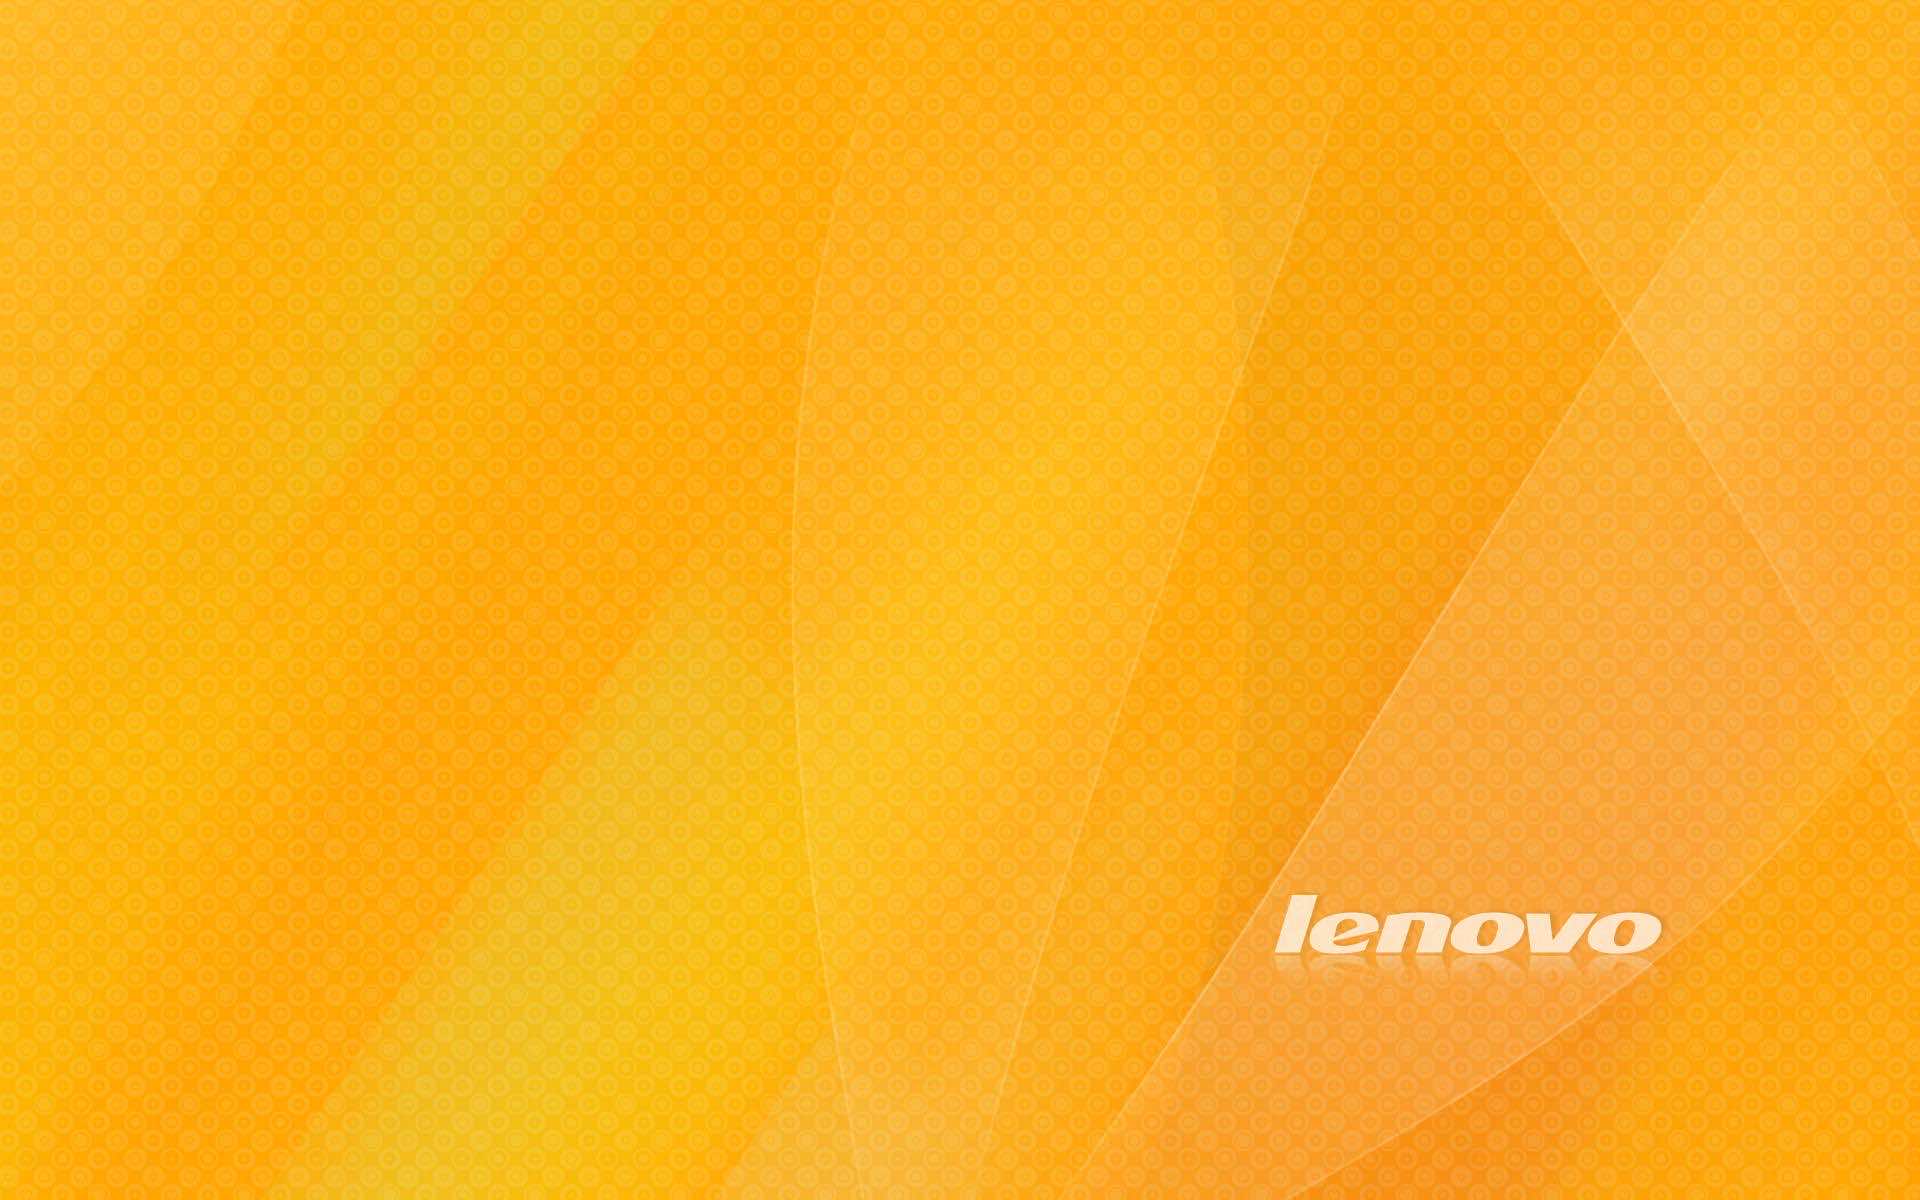 Lenovo Wallpaper Collection in HD for Download